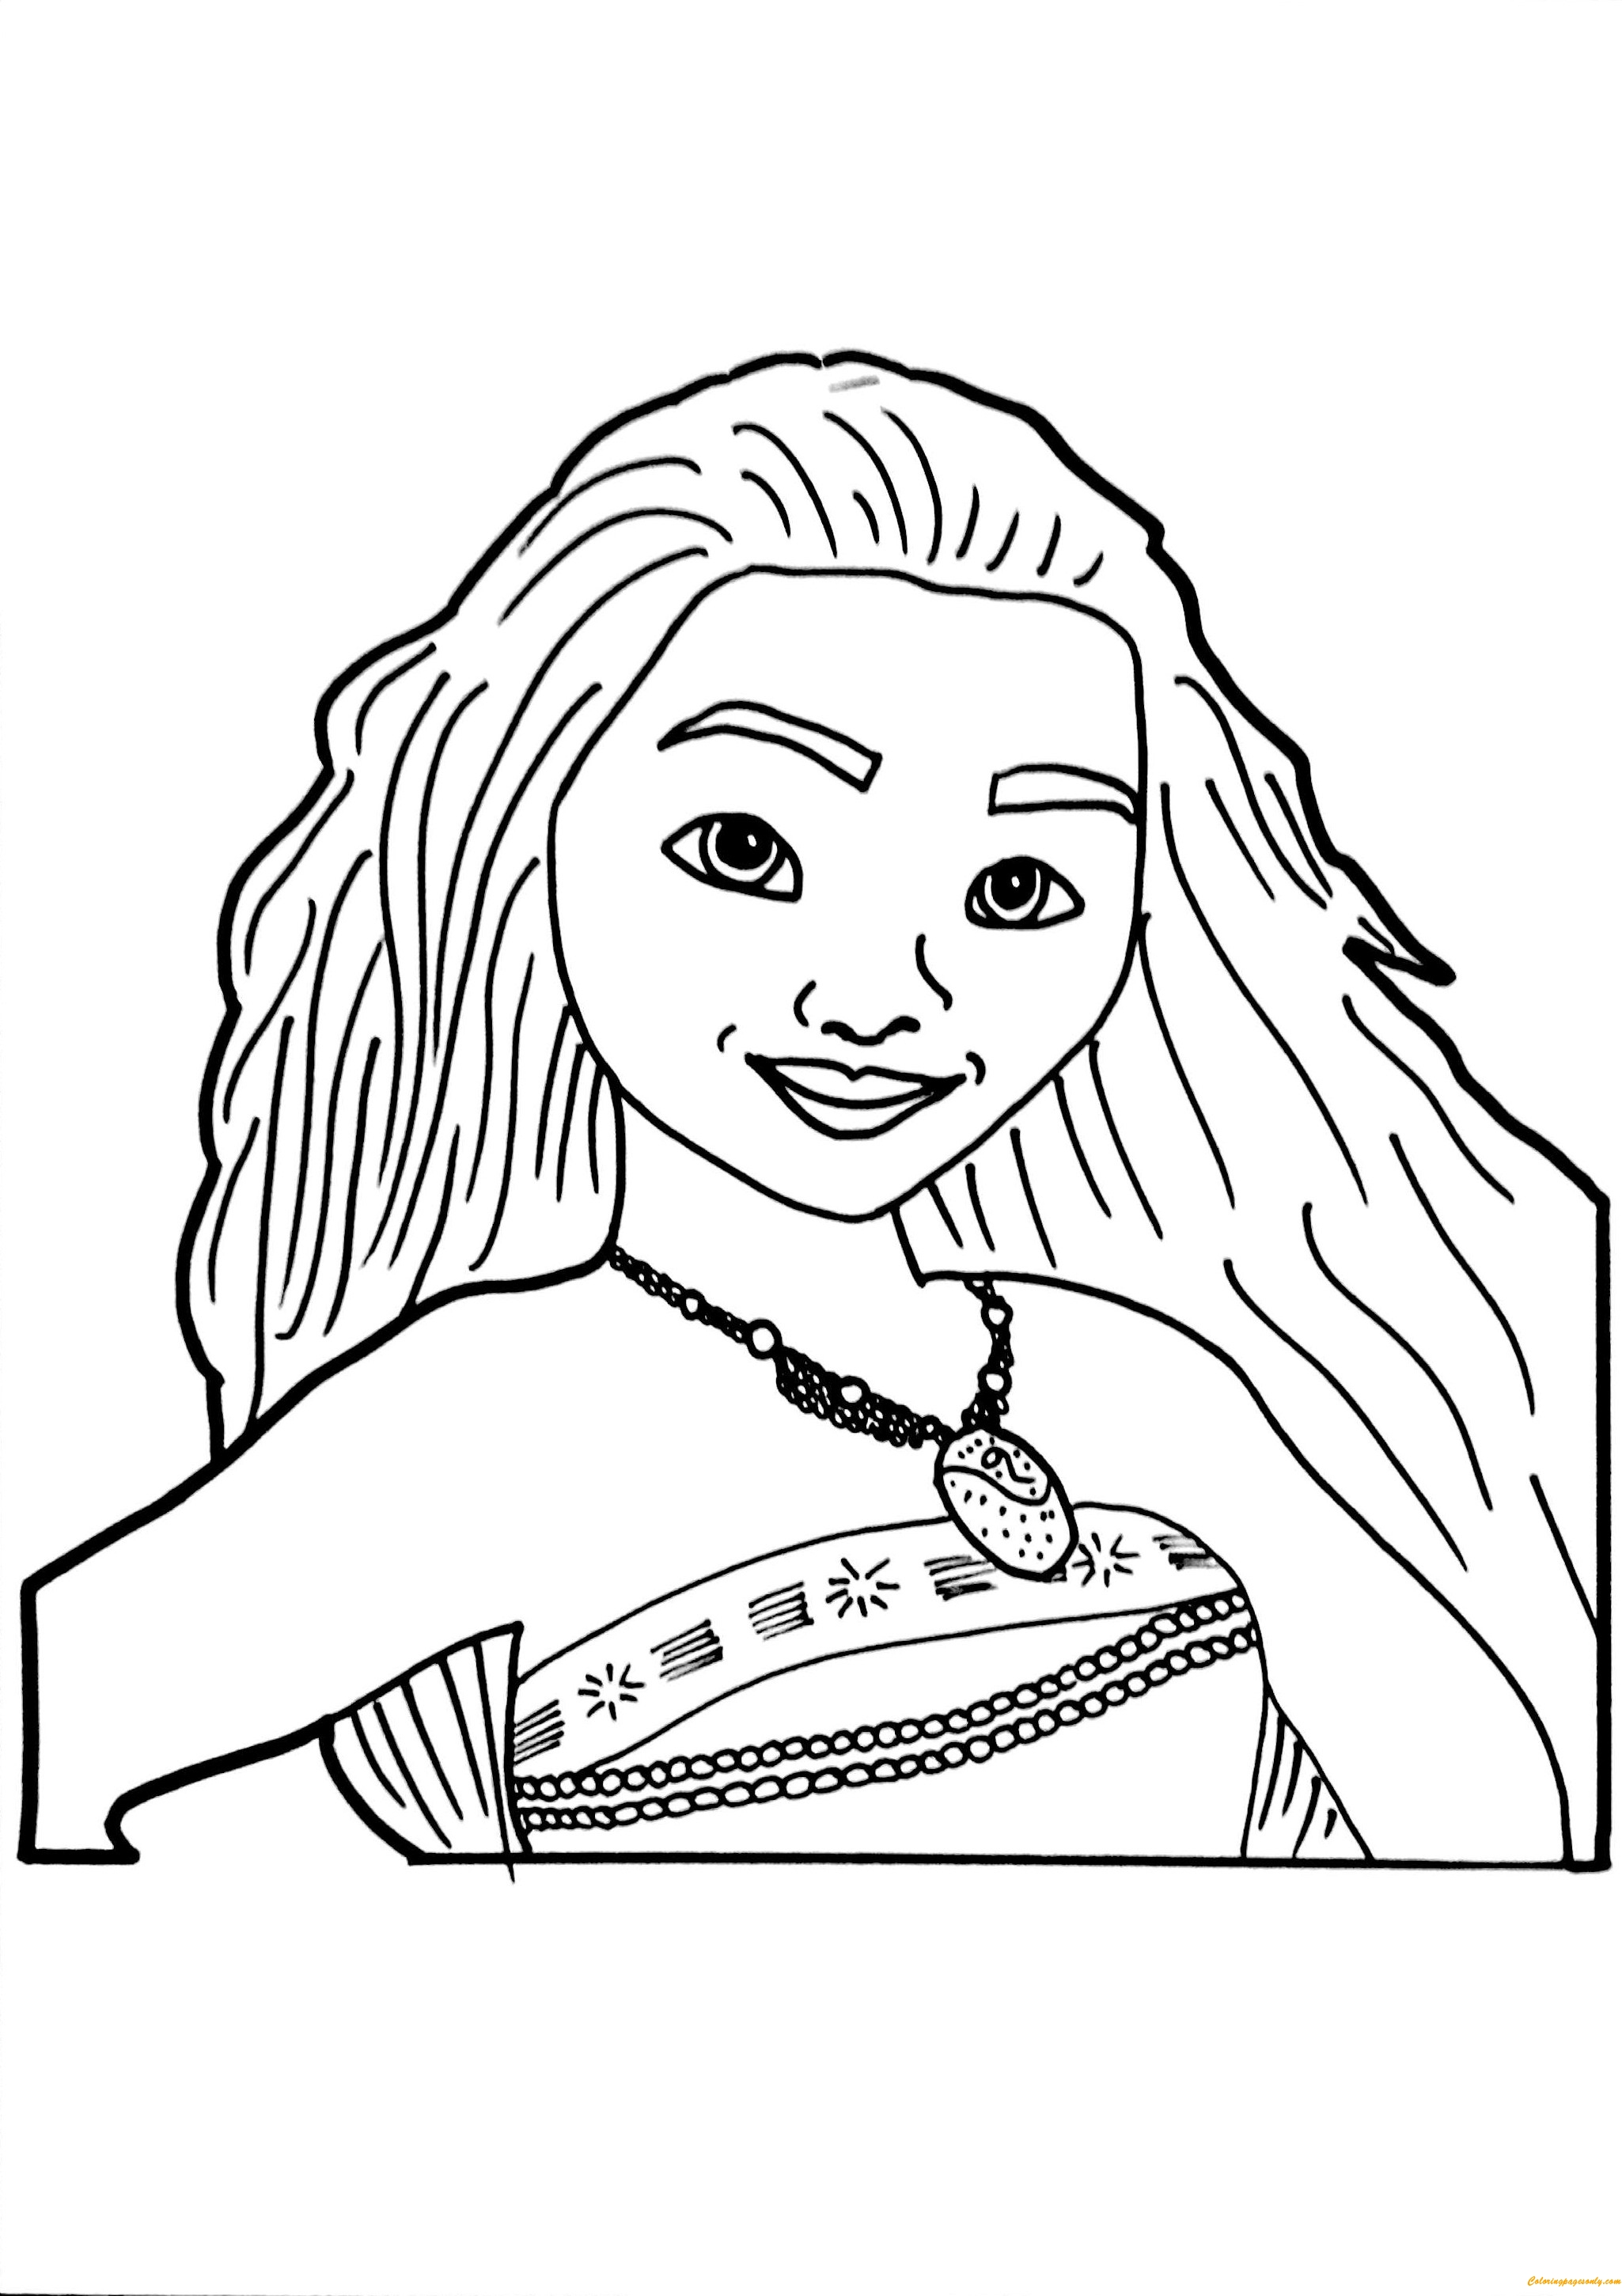 Moana Coloring Pages Free at GetColorings.com | Free ...